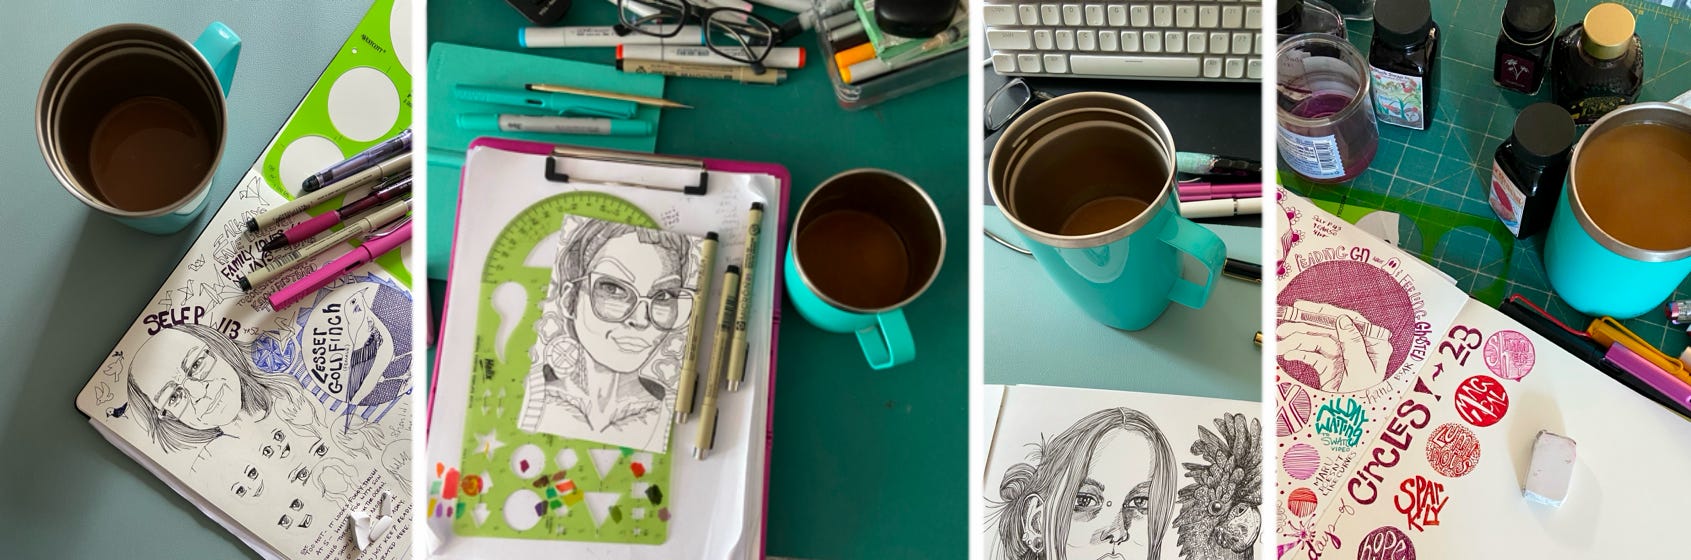 Coffee cup images with sketchbook art.